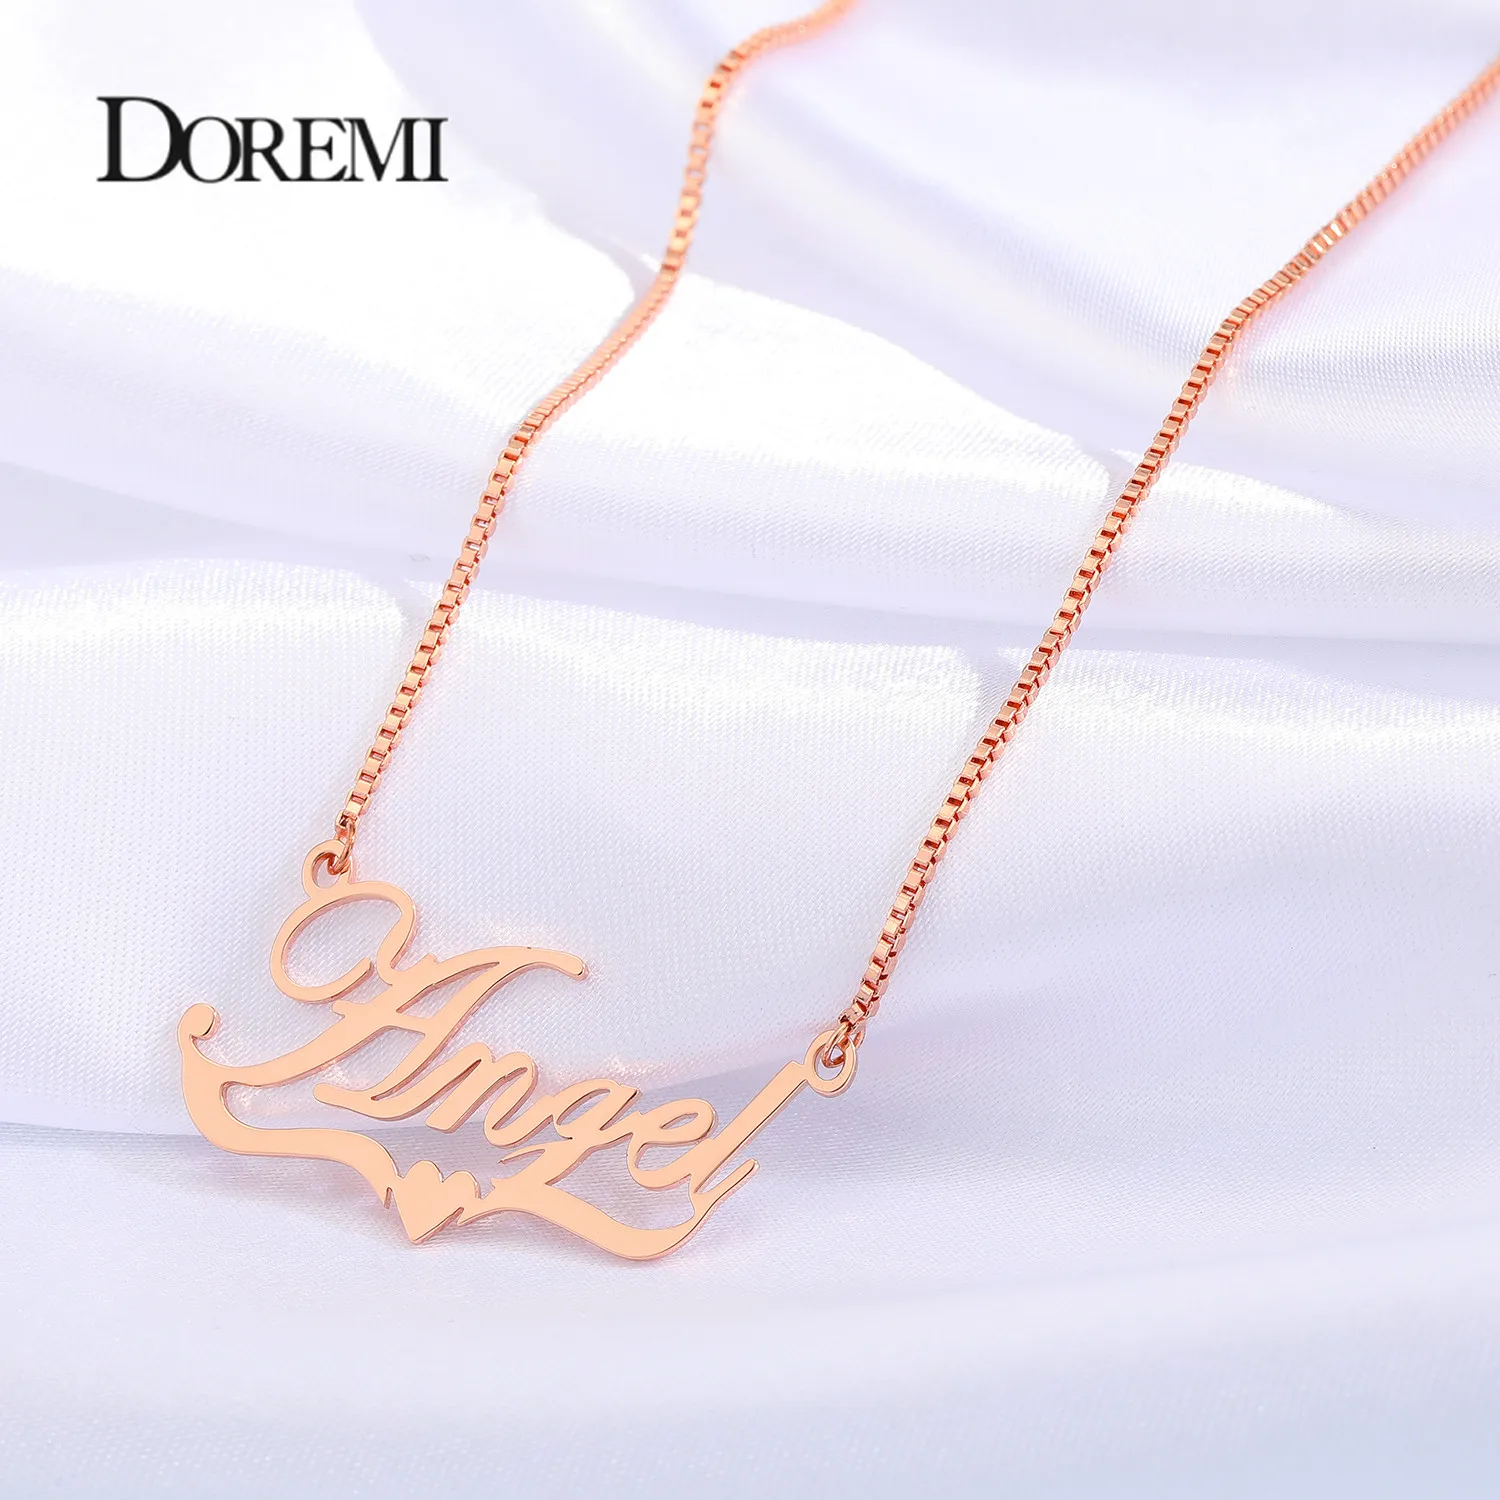 DOREMI Stainless Steel  Custom Name Necklace Personalized Name Pendant Heart Choker for Women Men Jewelry Valentine's Day Gift valentine s day metallic love heart glitter sequins flakes resin uv epoxy mold fillings art decorations diy crafts jewelry